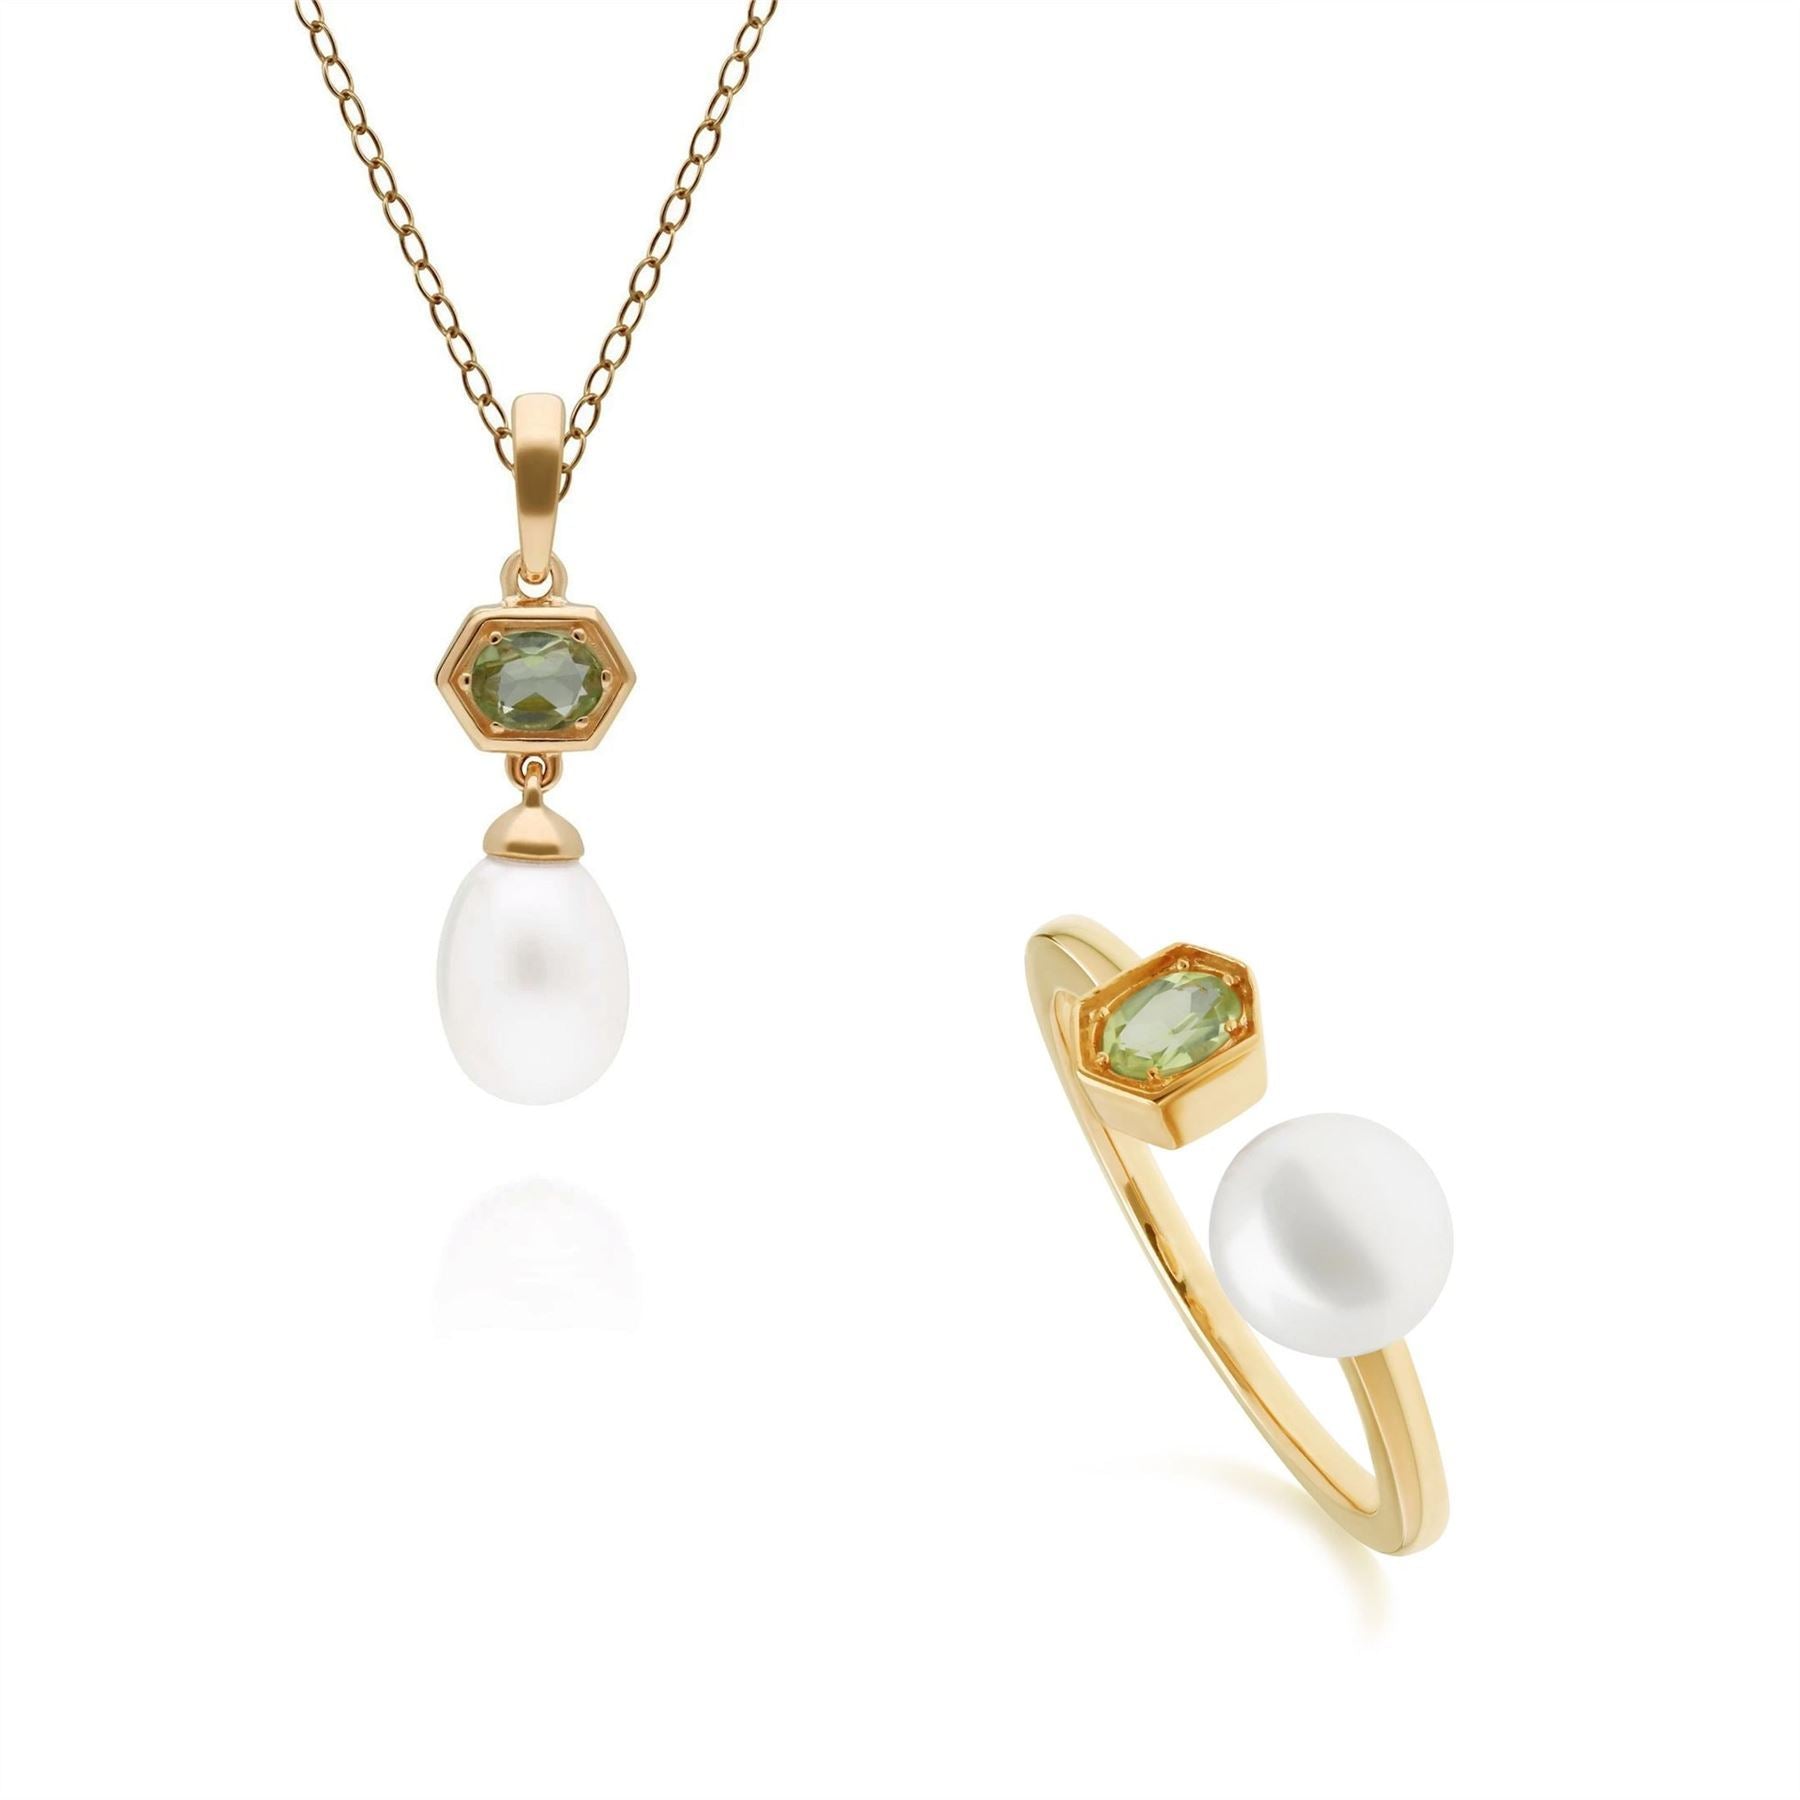 Modern Pearl & Peridot Pendant & Ring Set in Gold Plated Sterling Silver